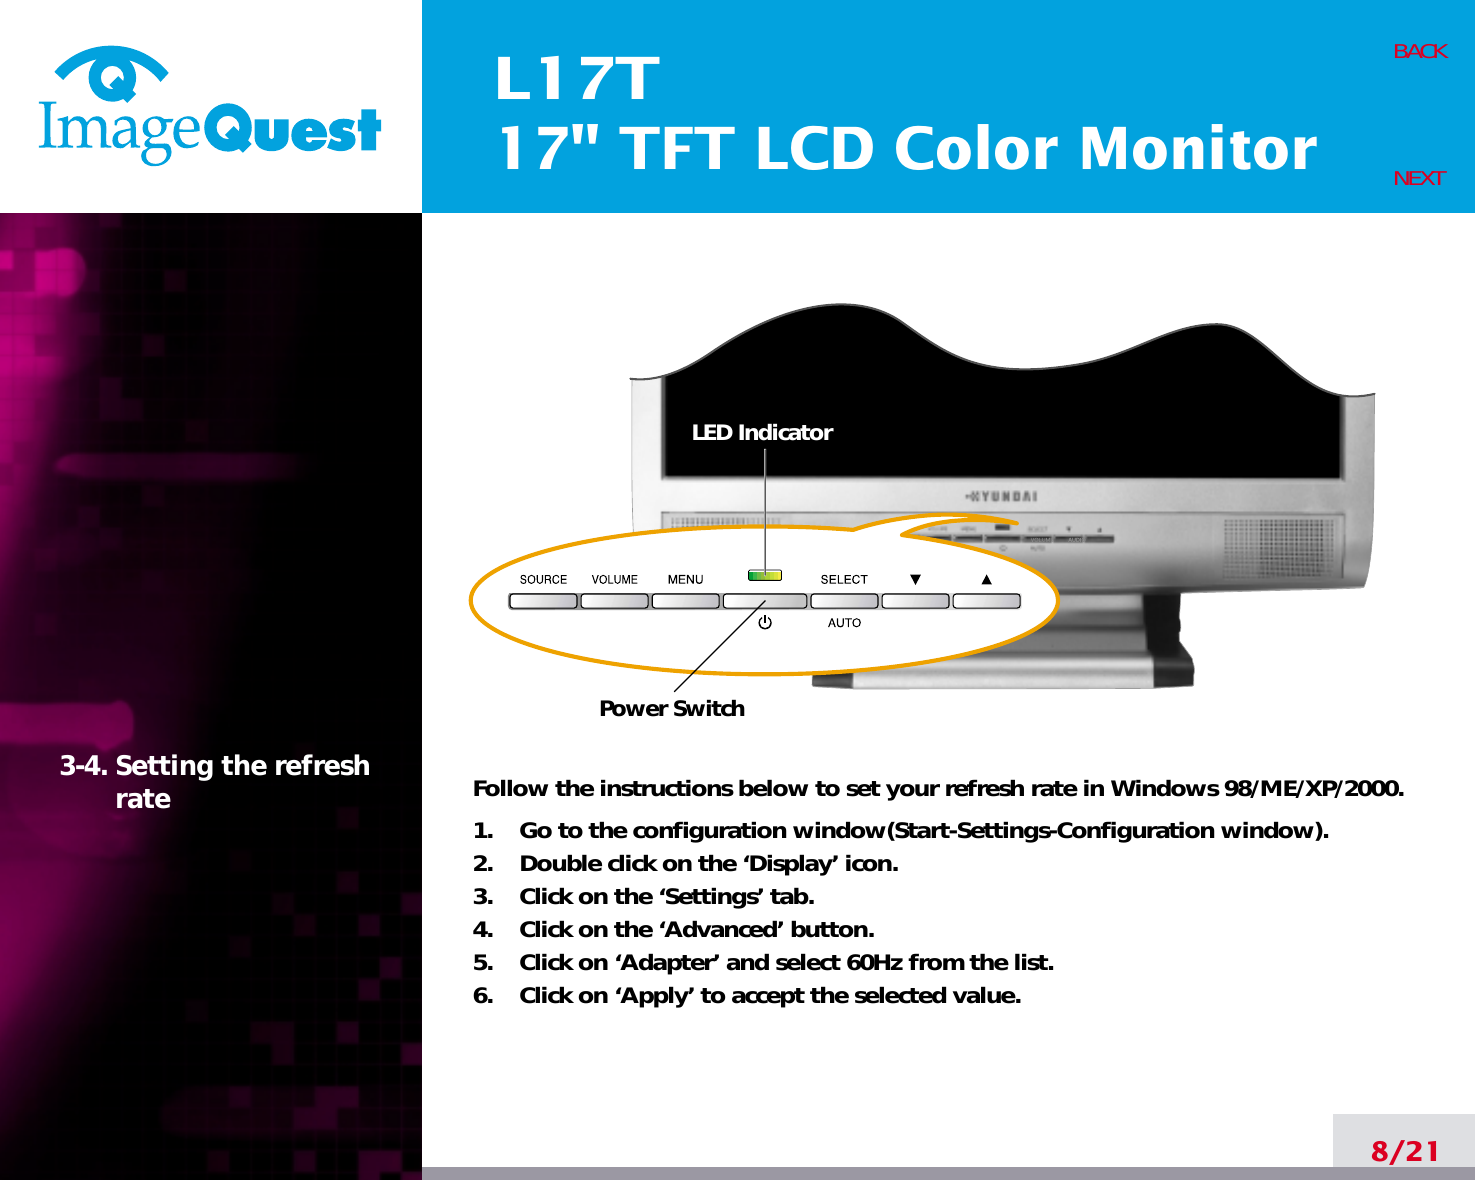 L17T17&quot; TFT LCD Color Monitor8/21BACKNEXT3-4. Setting the refreshrate Follow the instructions below to set your refresh rate in Windows 98/ME/XP/2000.1.    Go to the configuration window(Start-Settings-Configuration window).2.    Double click on the ‘Display’ icon.3.    Click on the ‘Settings’ tab.4.    Click on the ‘Advanced’ button.5.    Click on ‘Adapter’ and select 60Hz from the list.6.    Click on ‘Apply’ to accept the selected value.Power SwitchLED Indicator